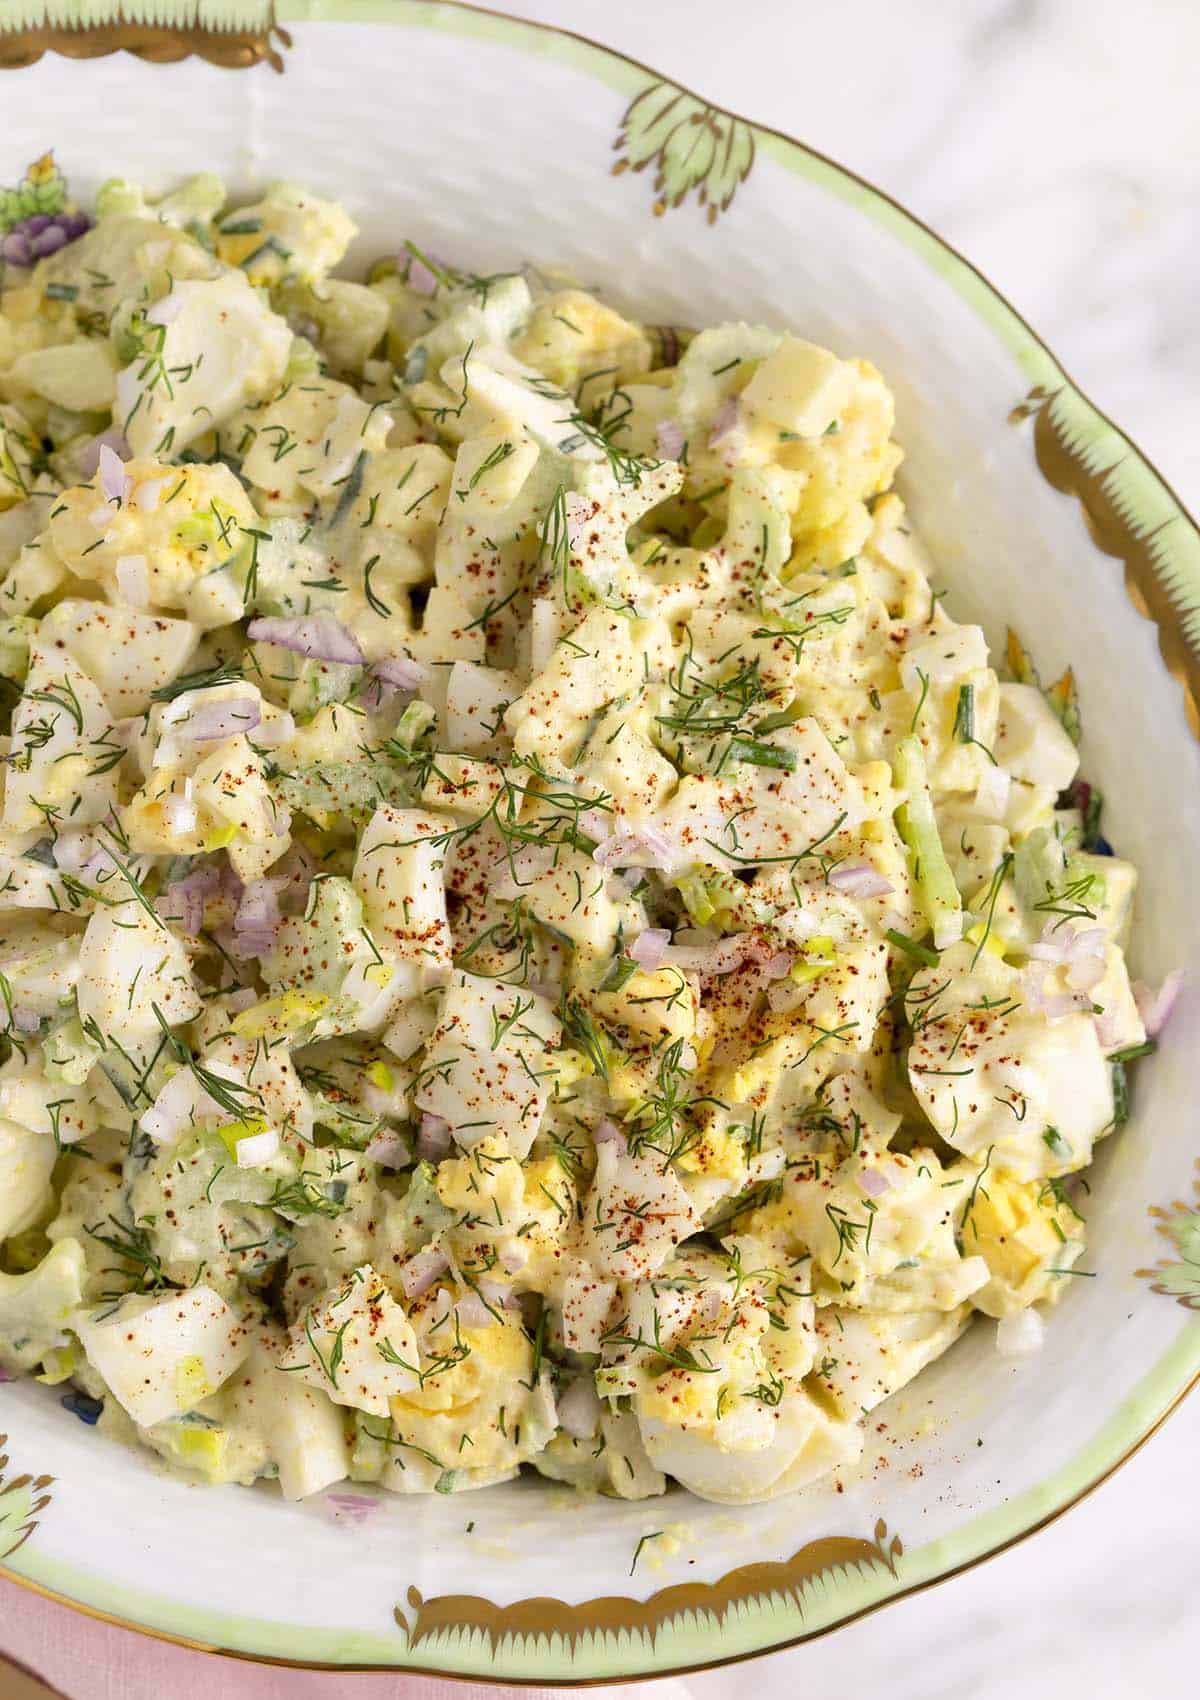 Egg salad sprinkled with fresh dill in a porcelain bowl.